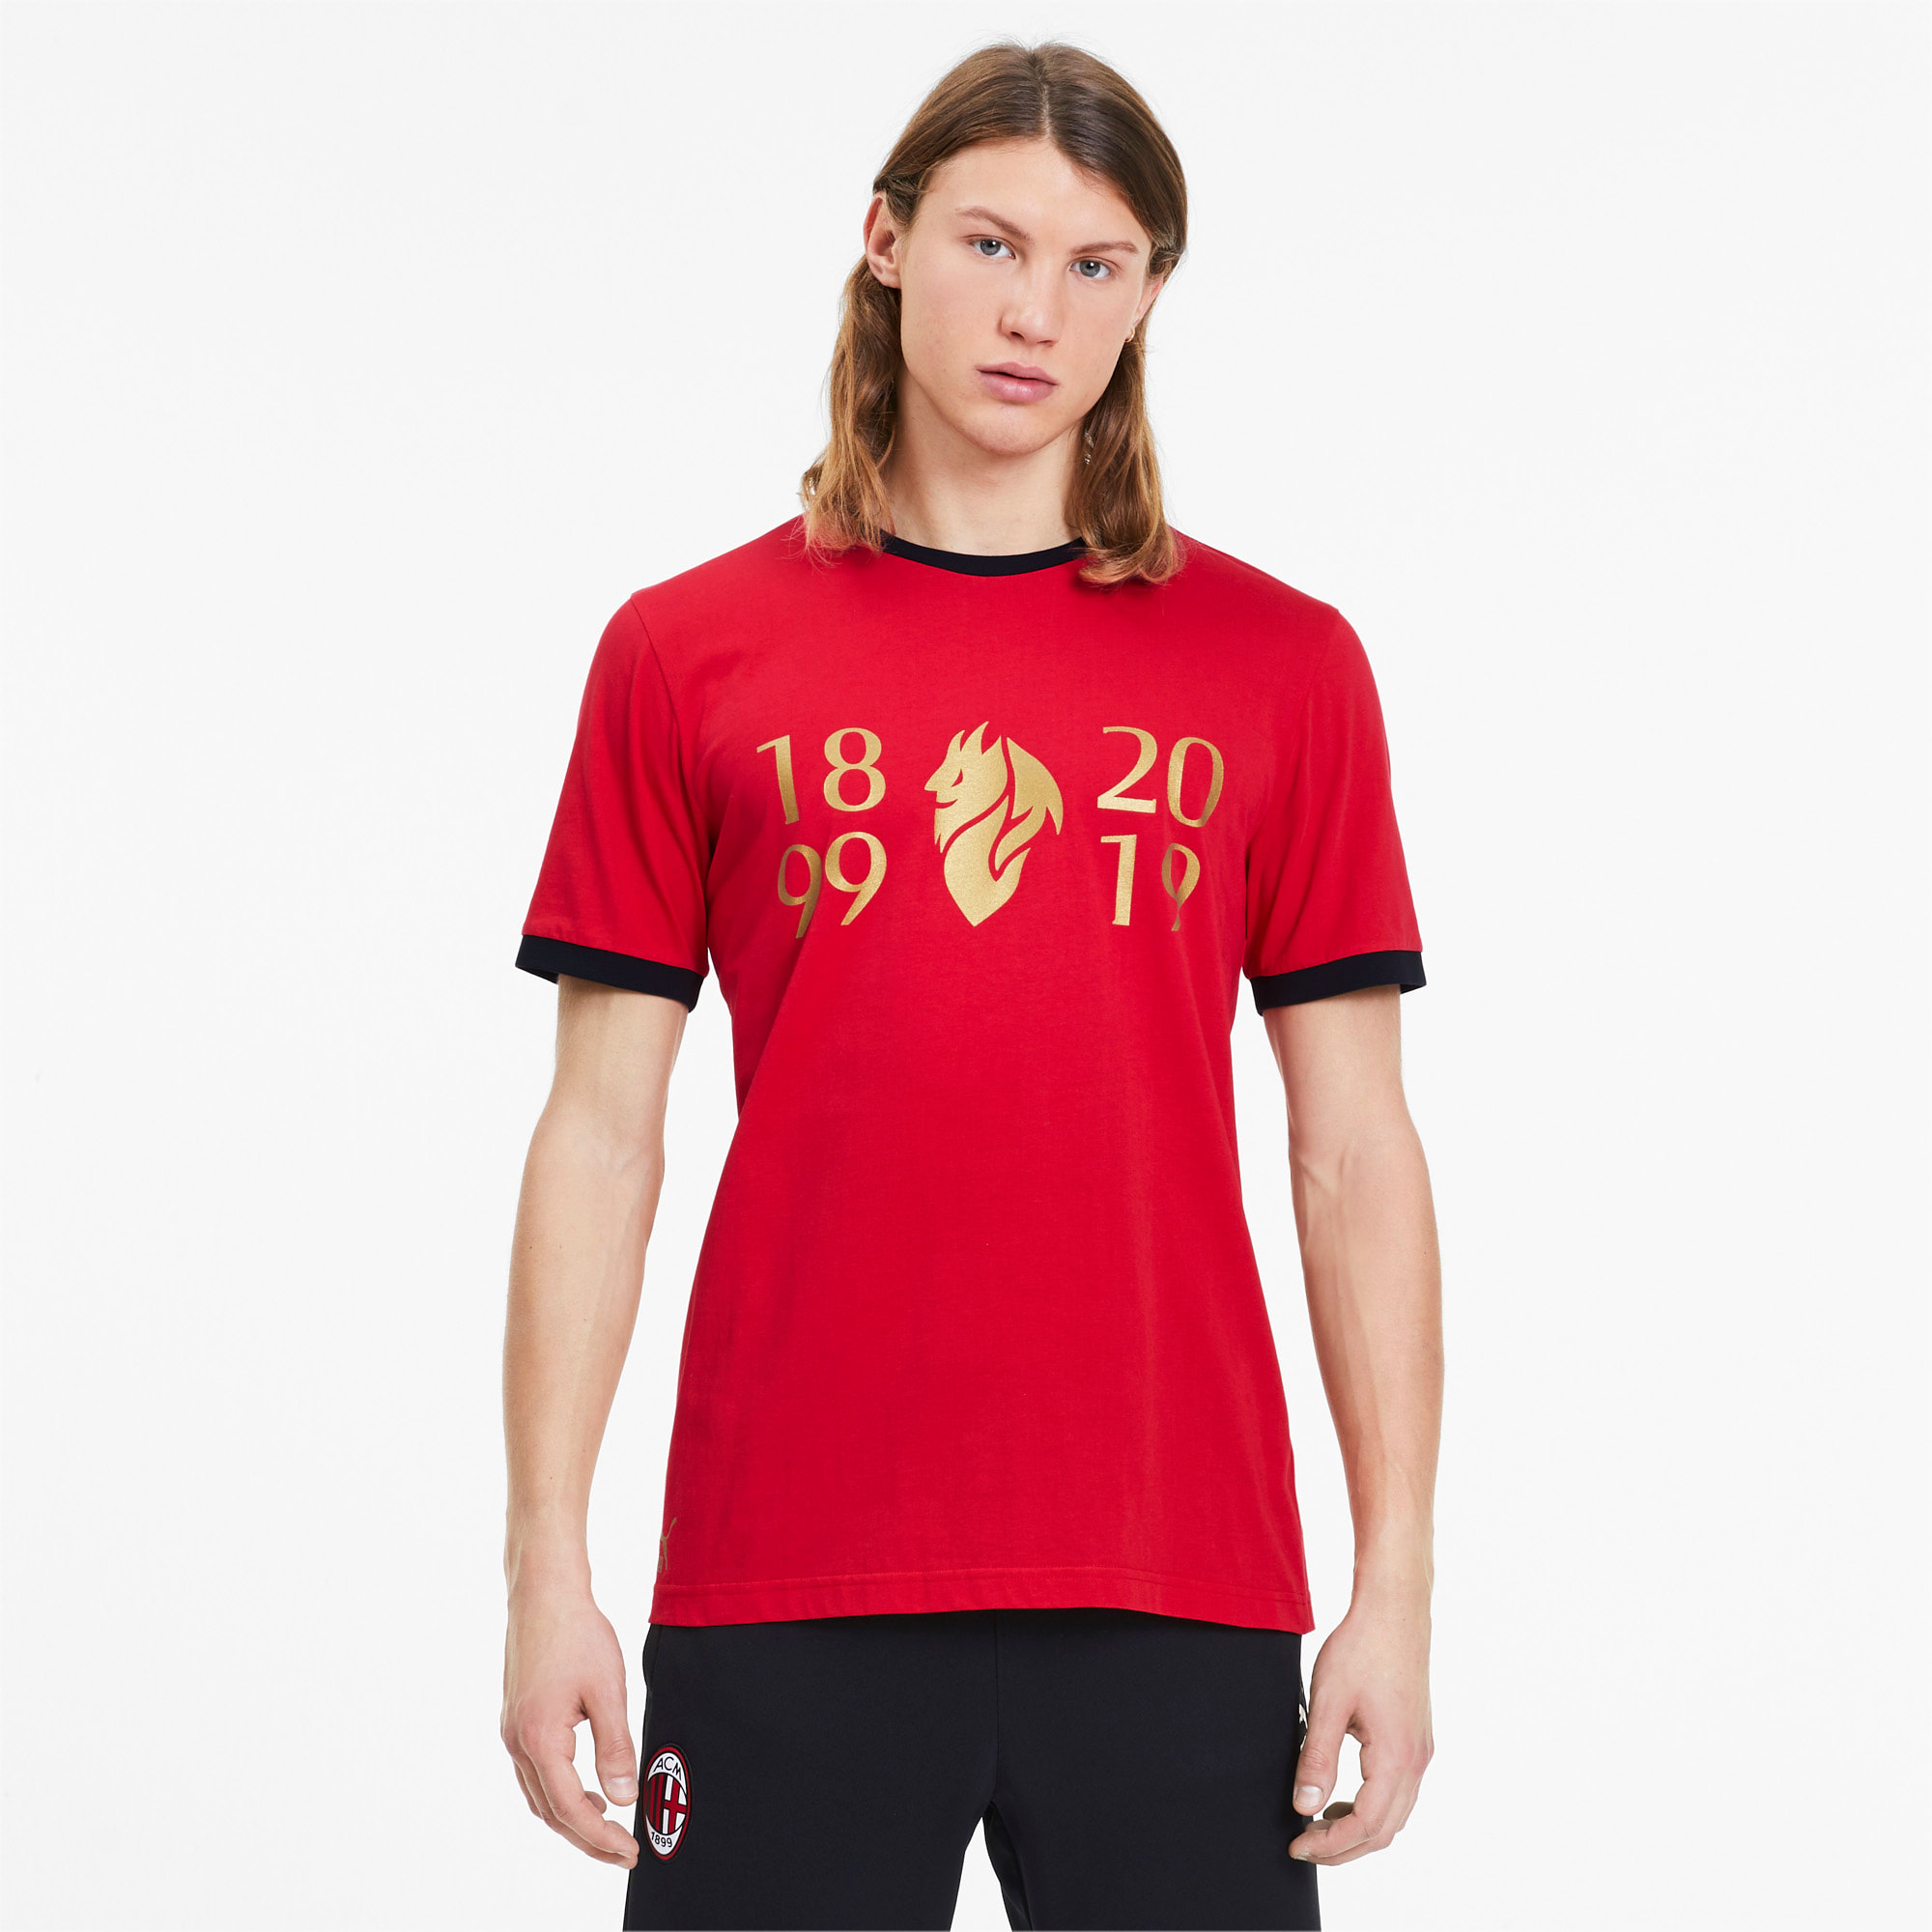 red and gold puma shirt